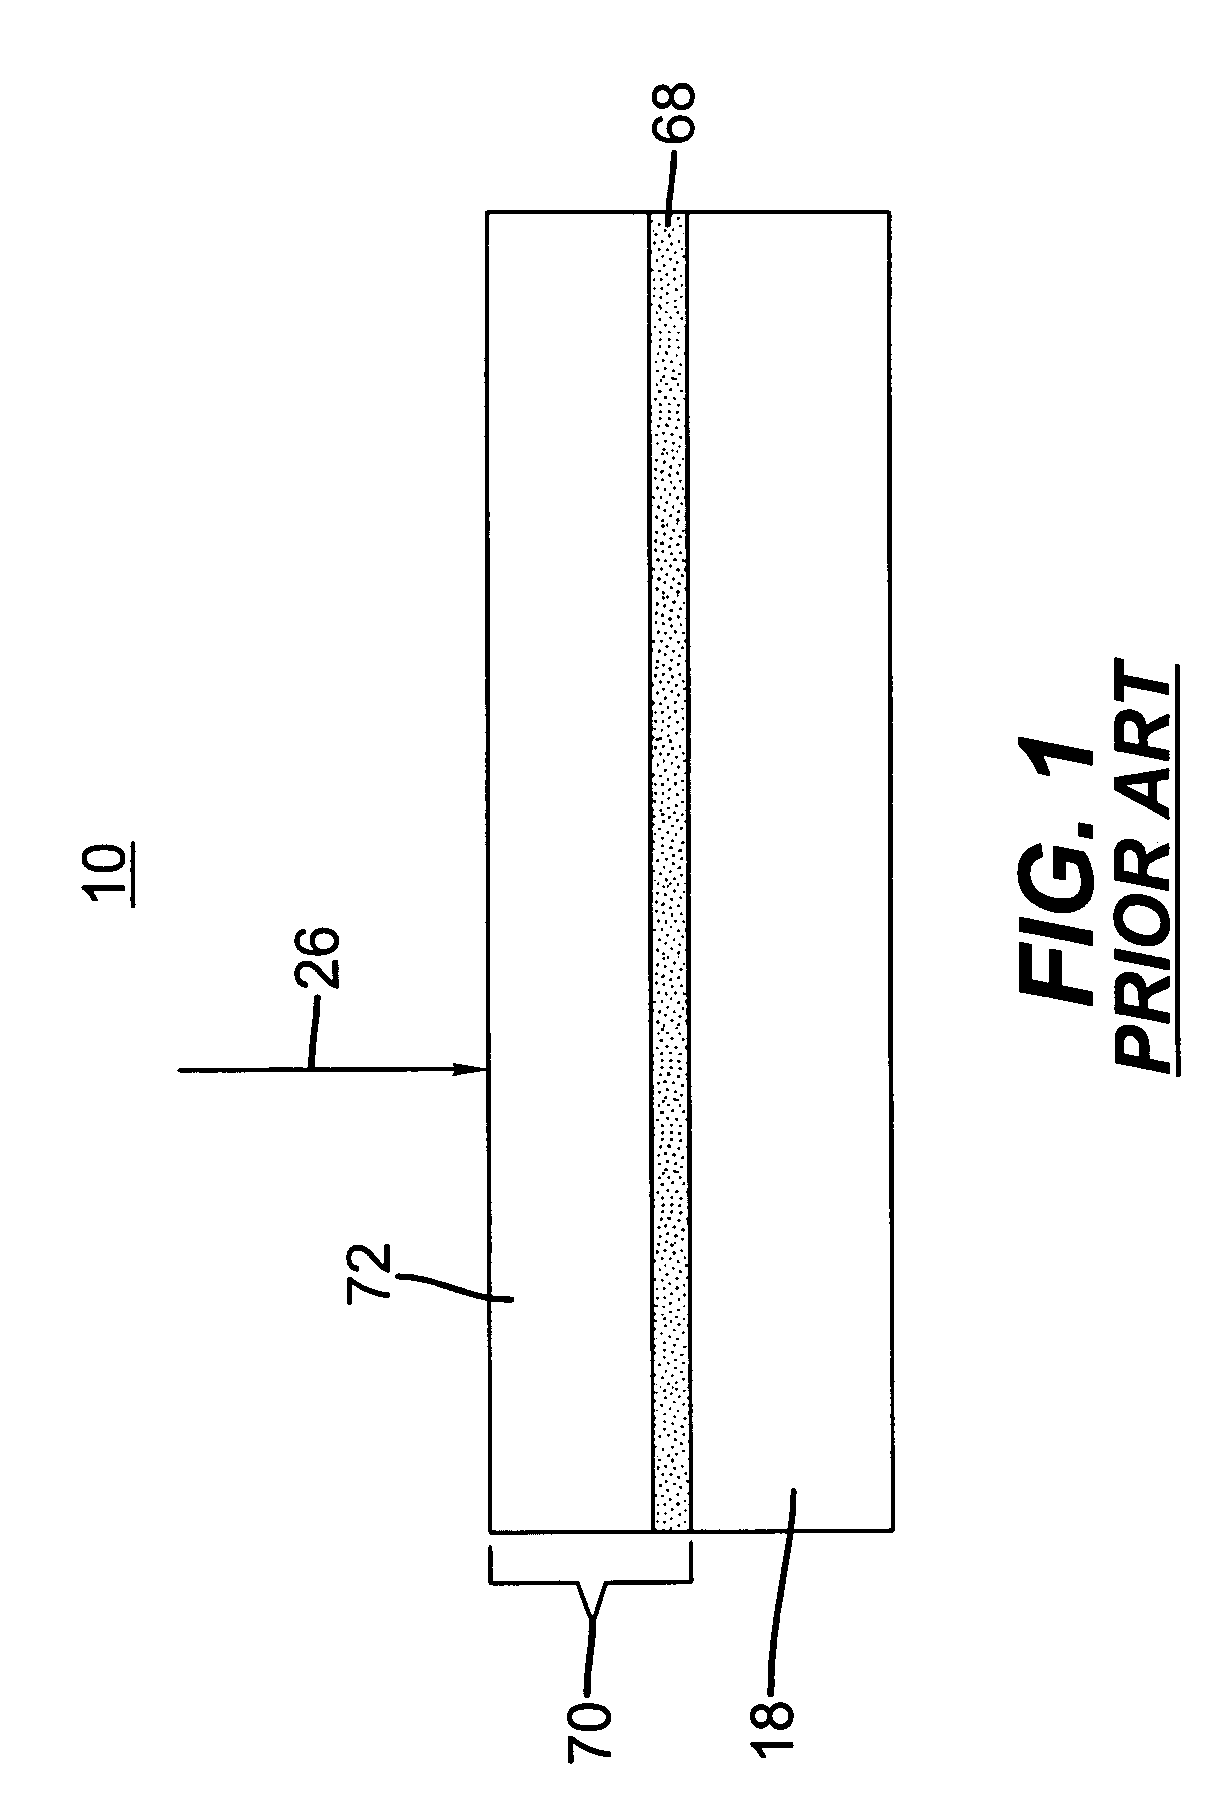 Laser resist transfer for microfabrication of electronic devices